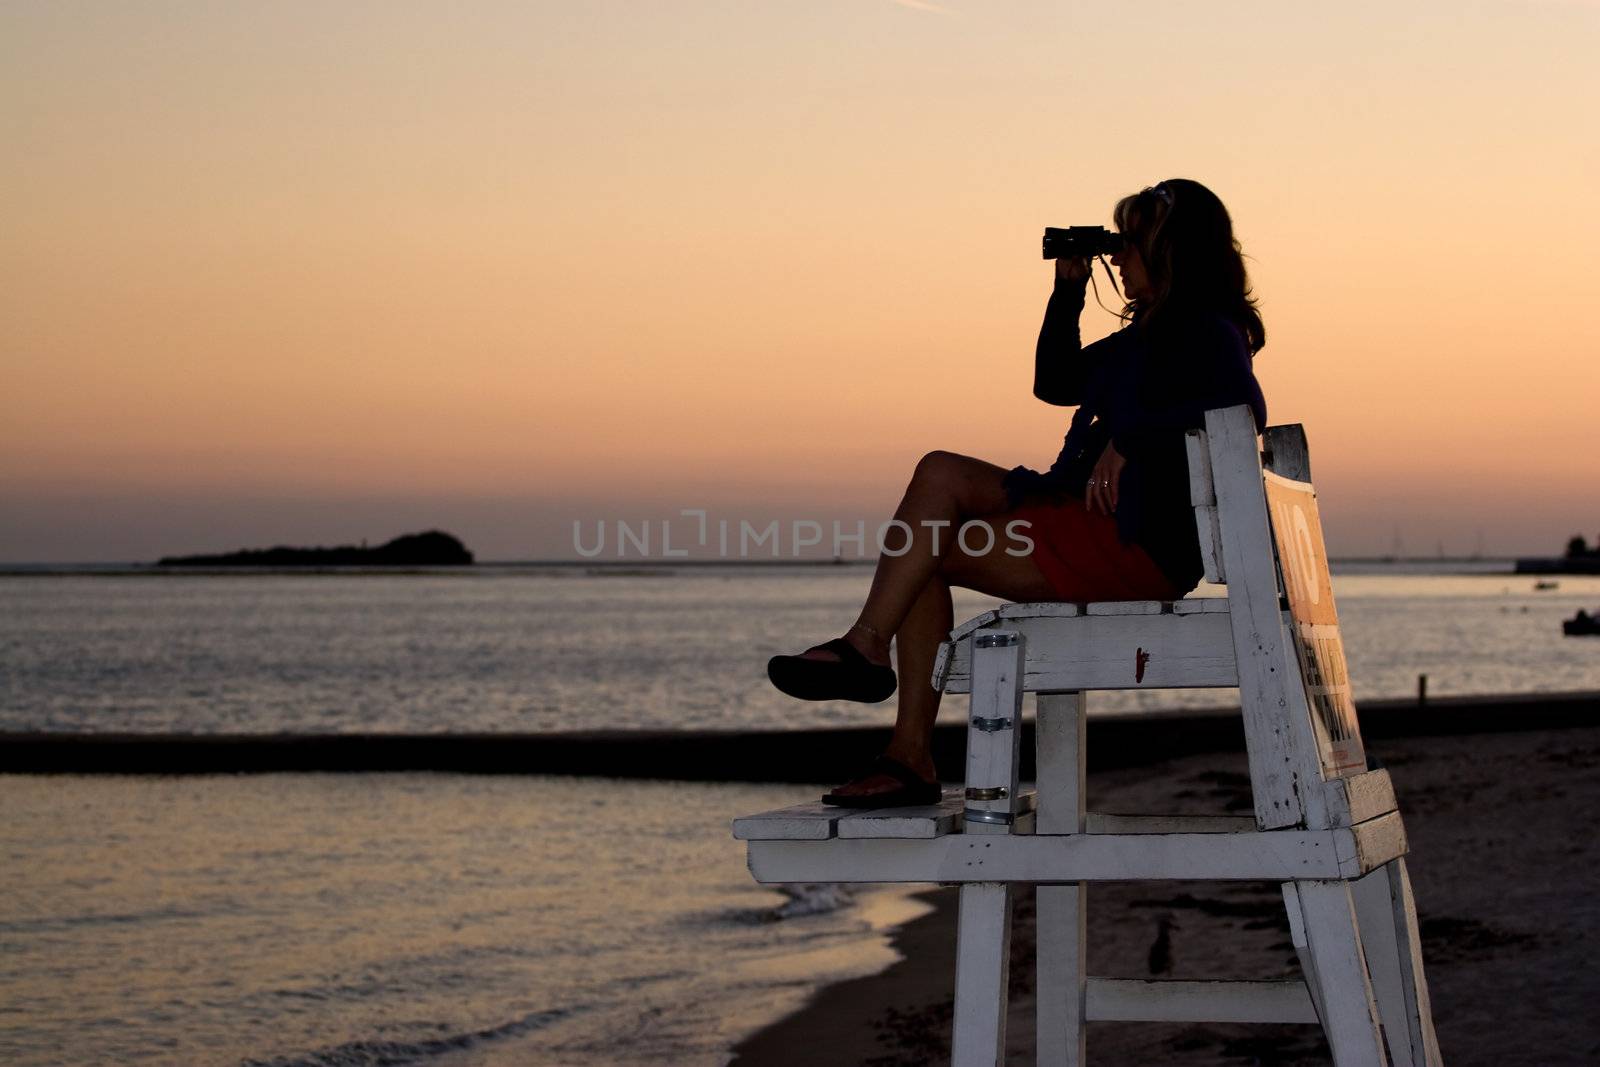 A silhouette of a woman looking with binoculars at the beach while sitting on a lifeguard chair.